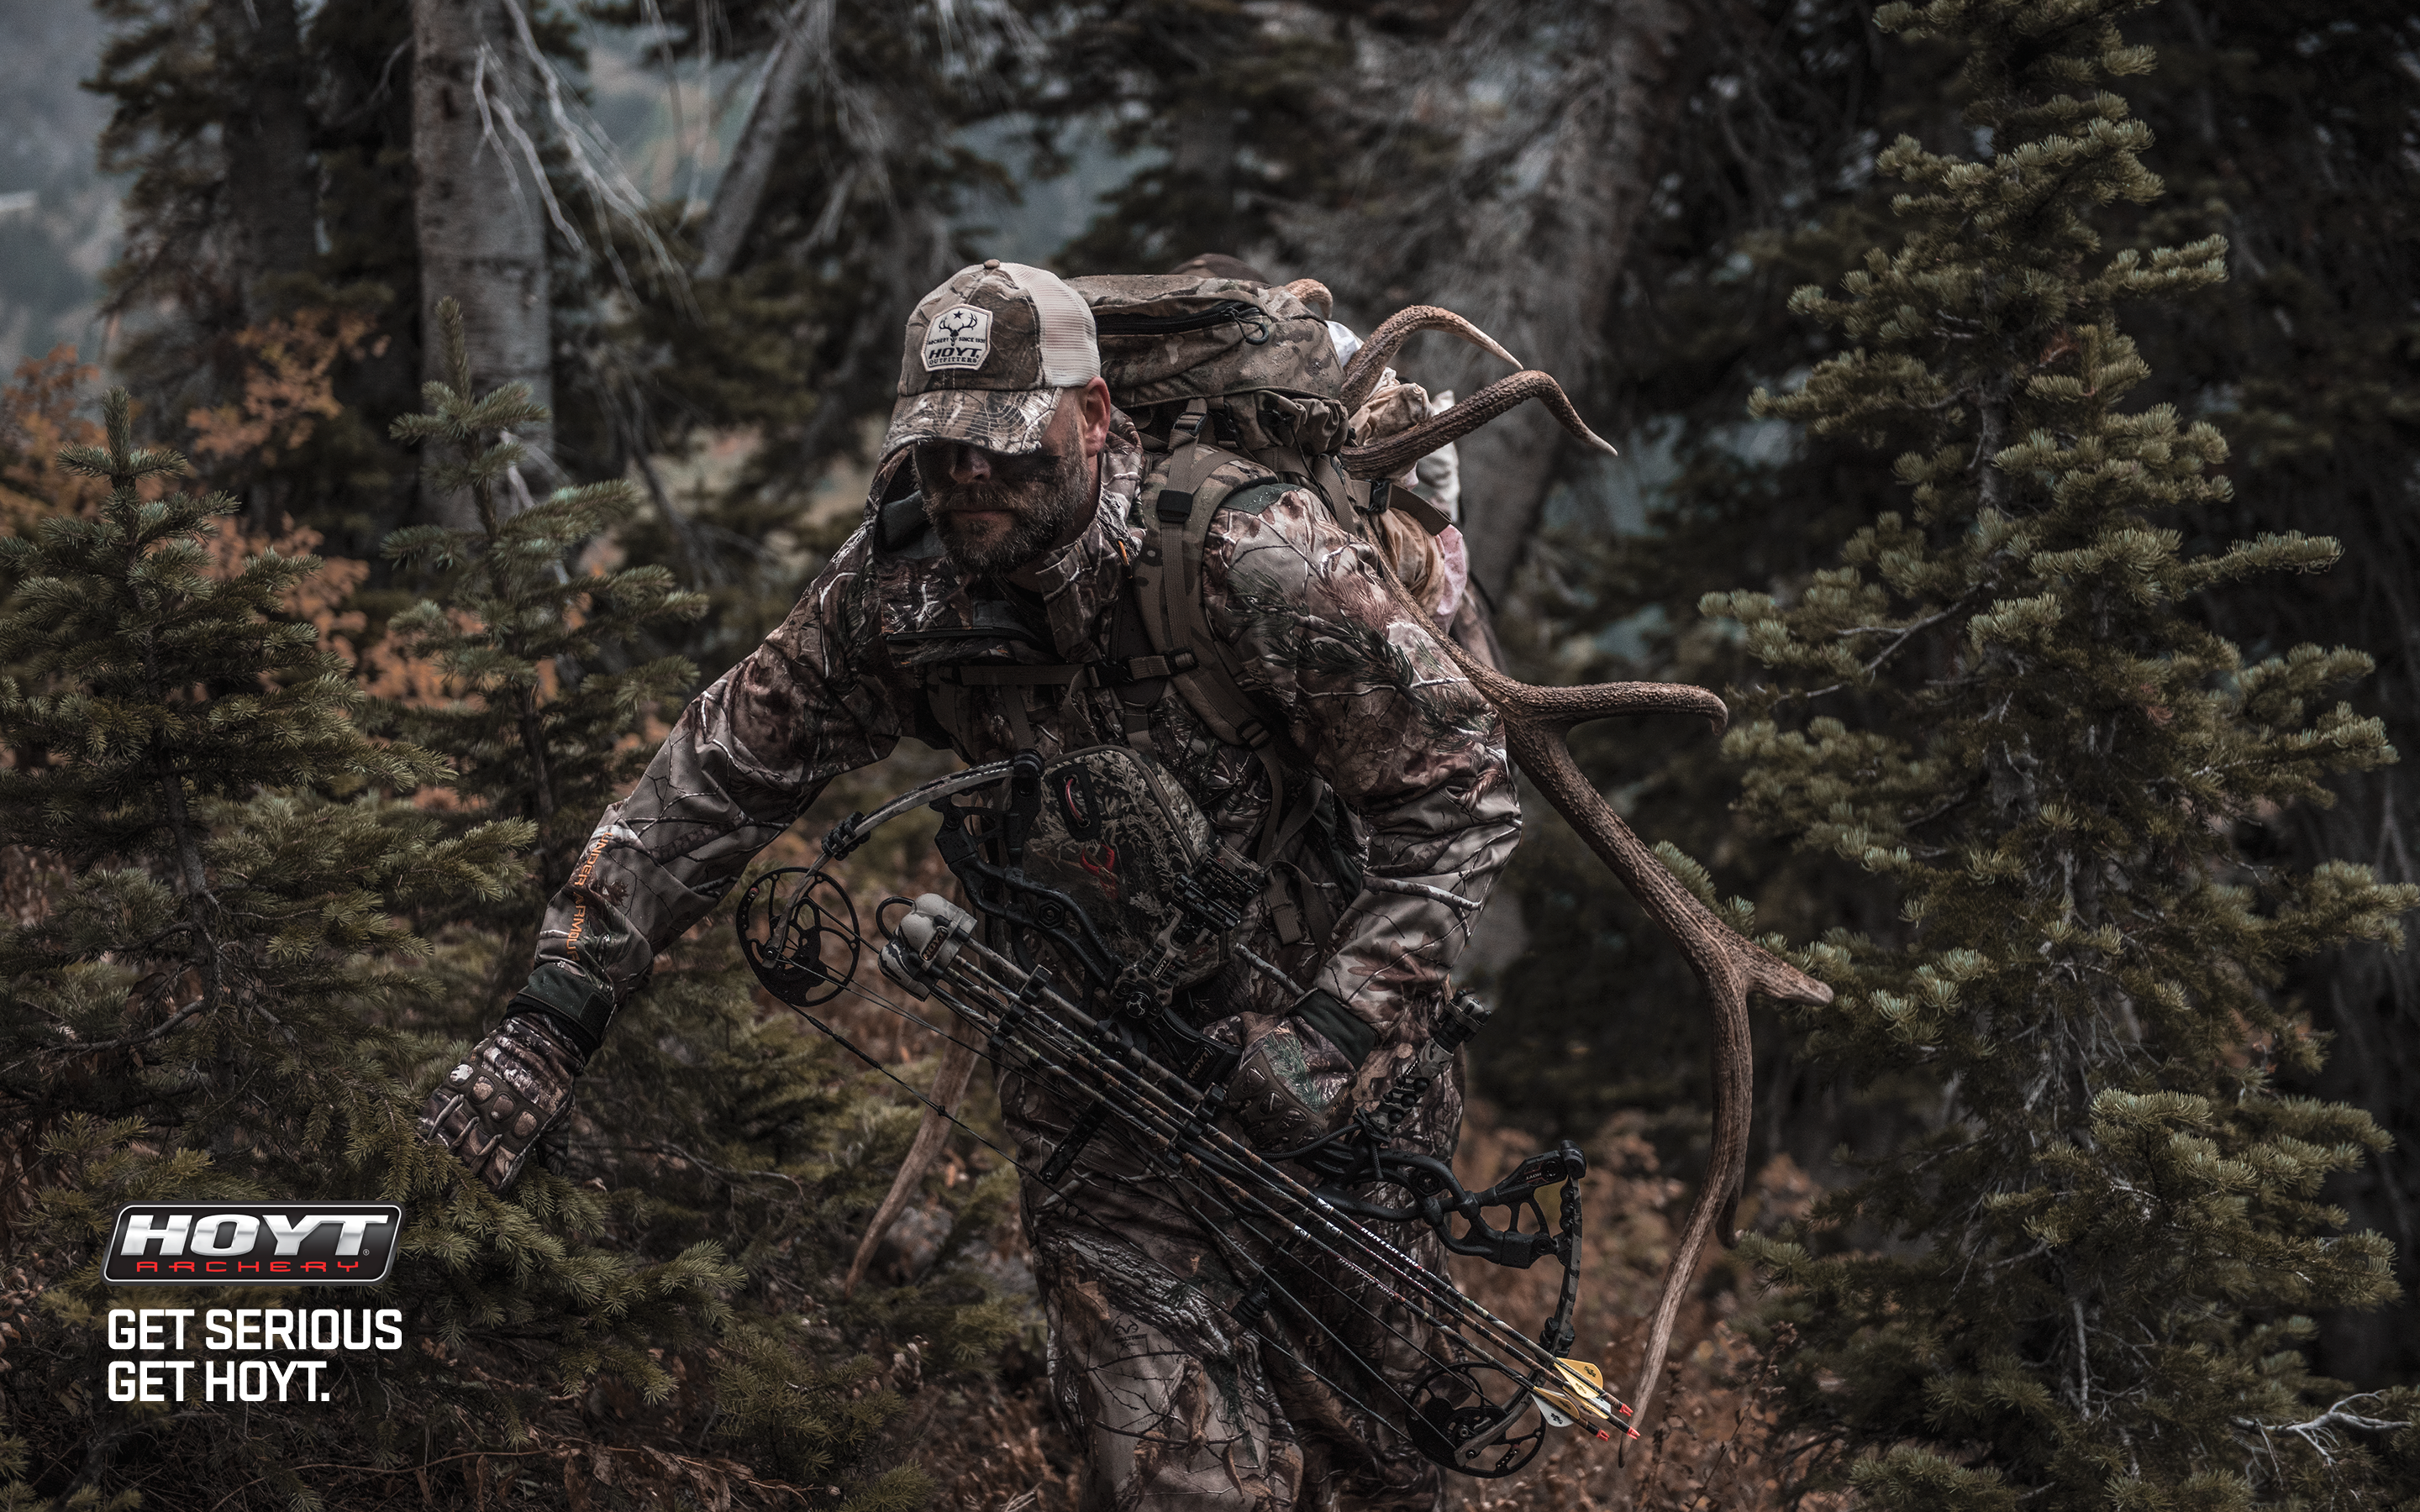 Bowhunting Wallpaper Ignite Get Serious Hoyt Traditional